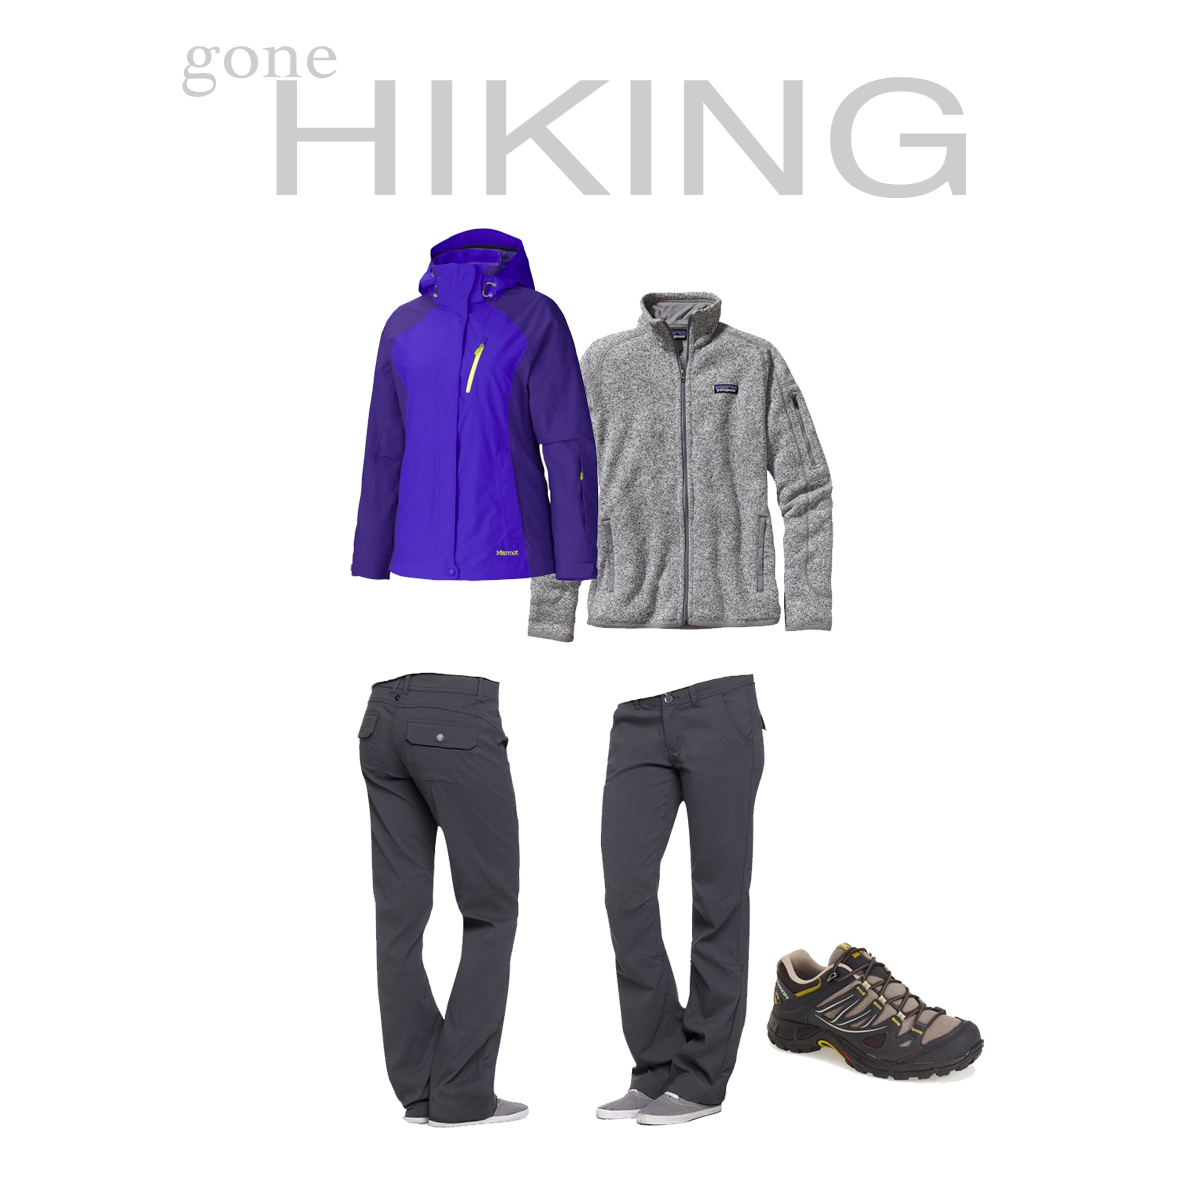 hiking_outdoor_clothing